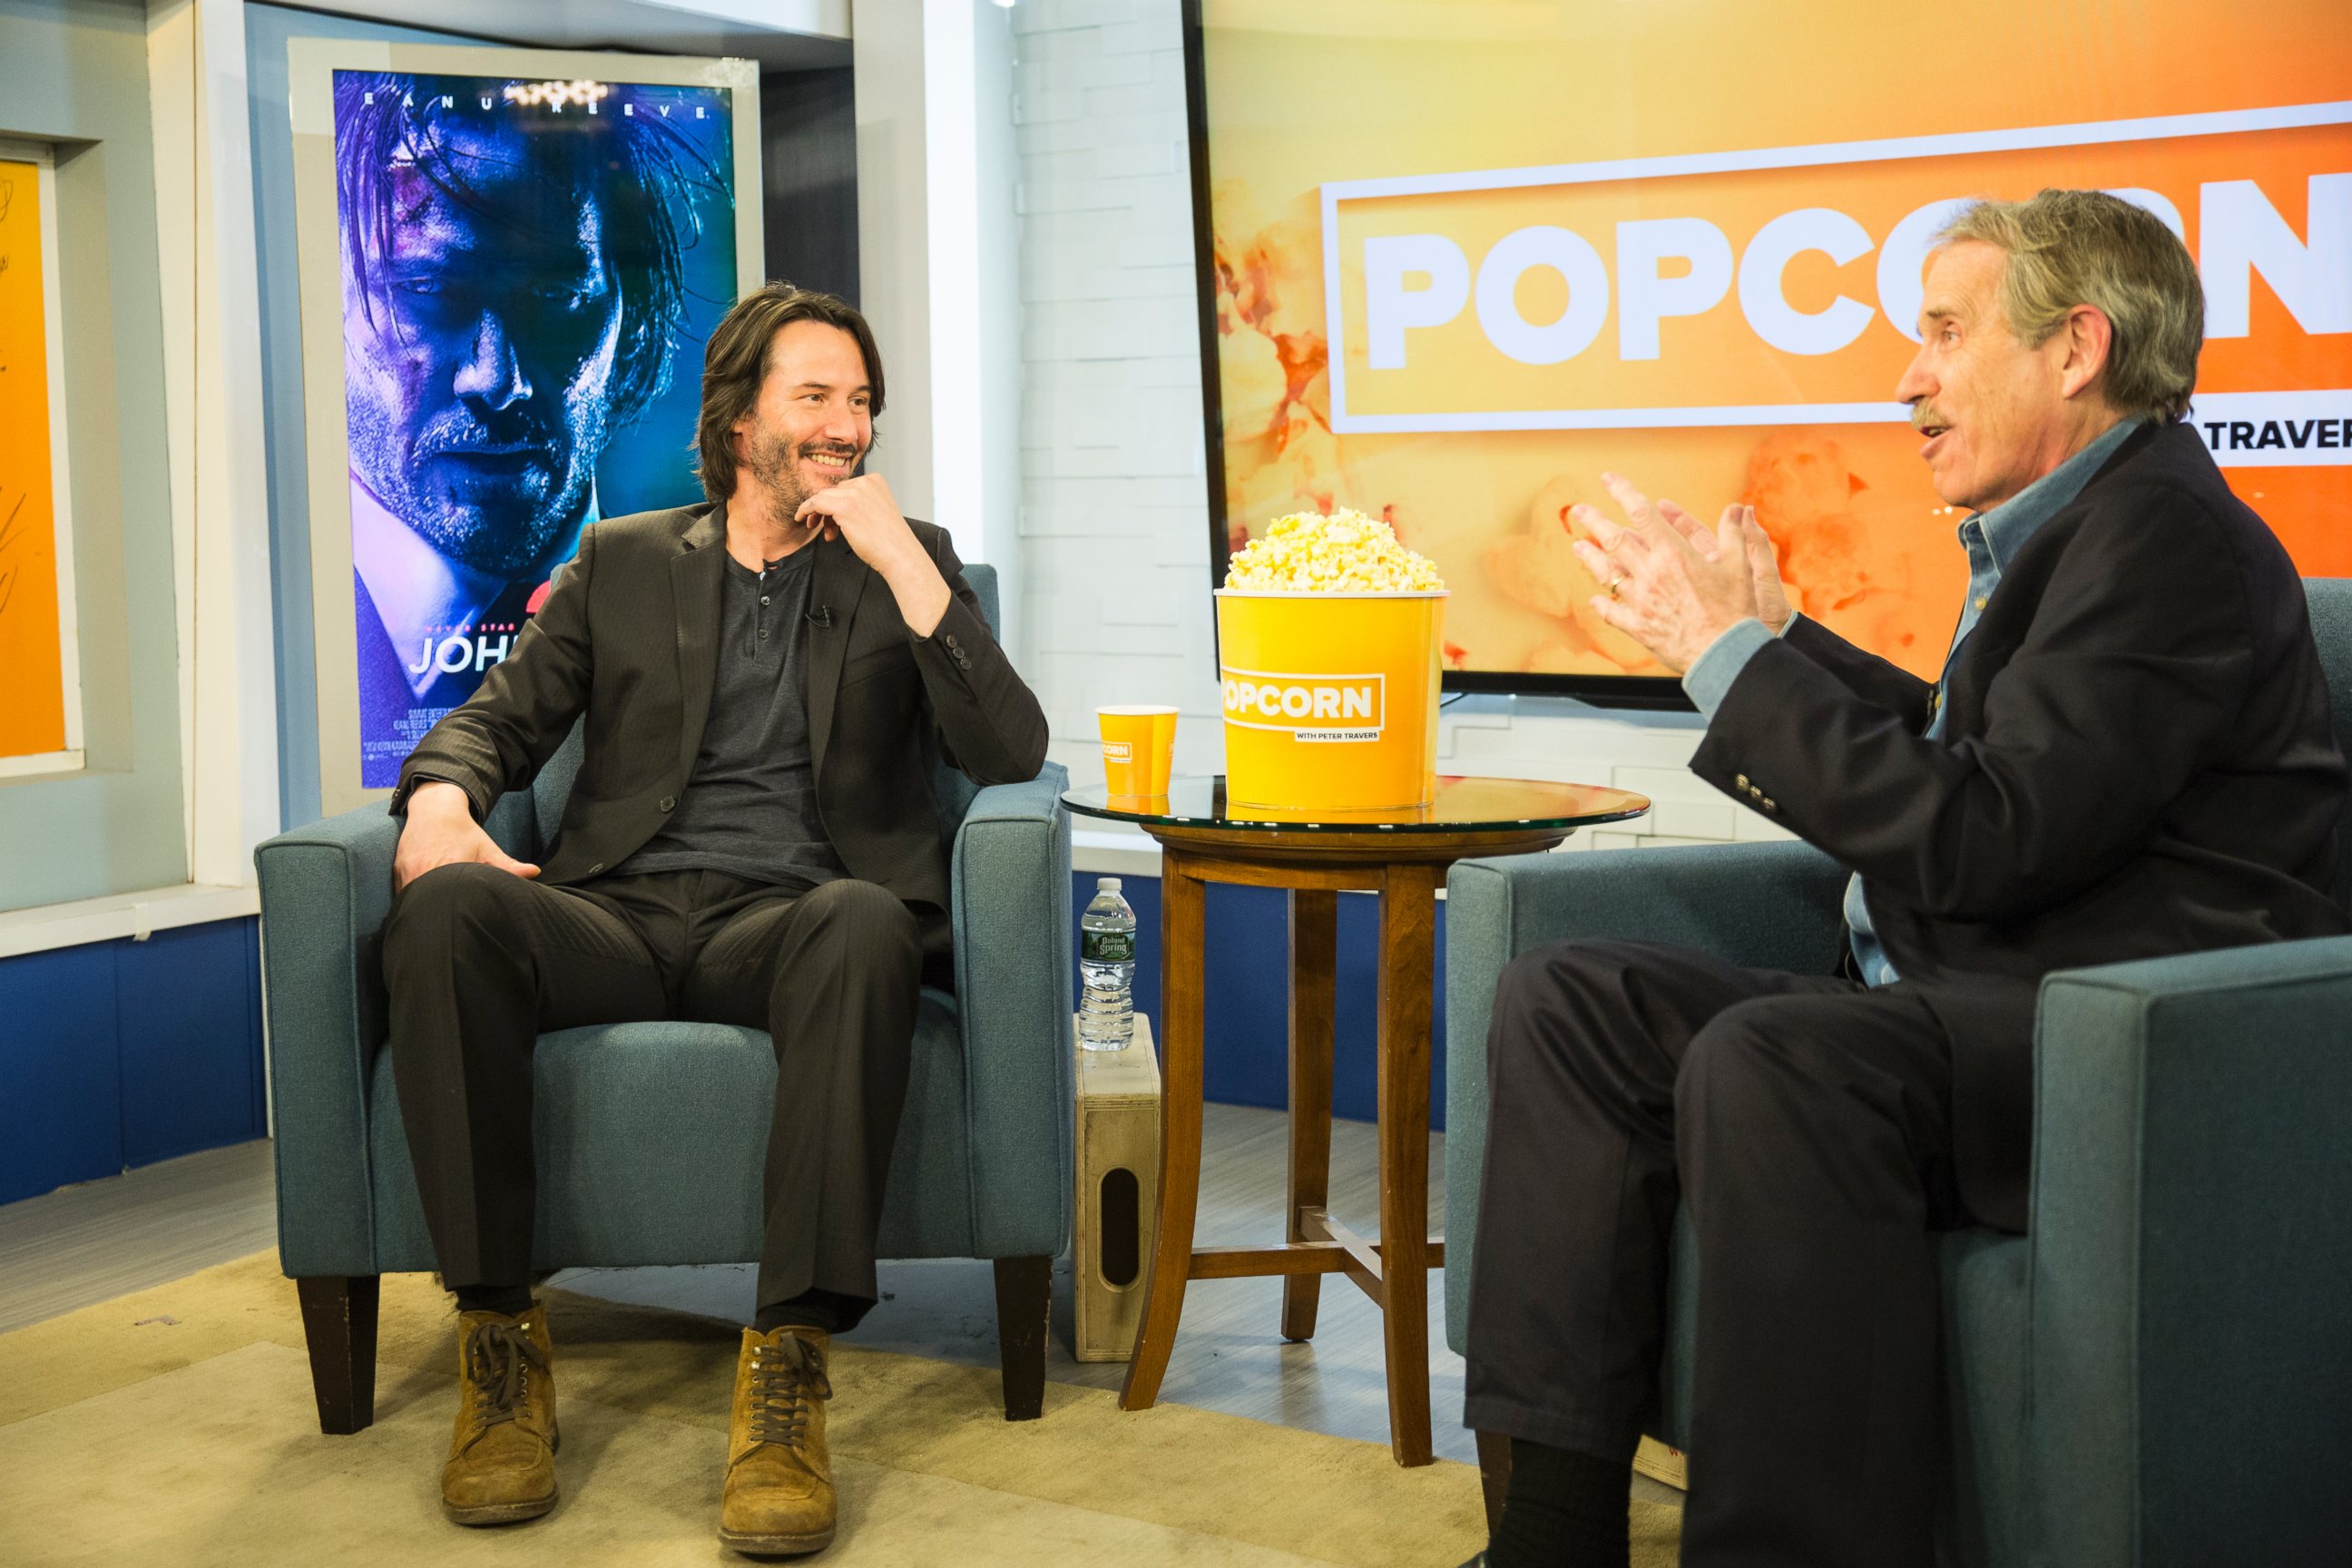 PHOTO: Keanu Reeves and Peter Travers at the ABC Studios in New York, Feb. 2, 2017.